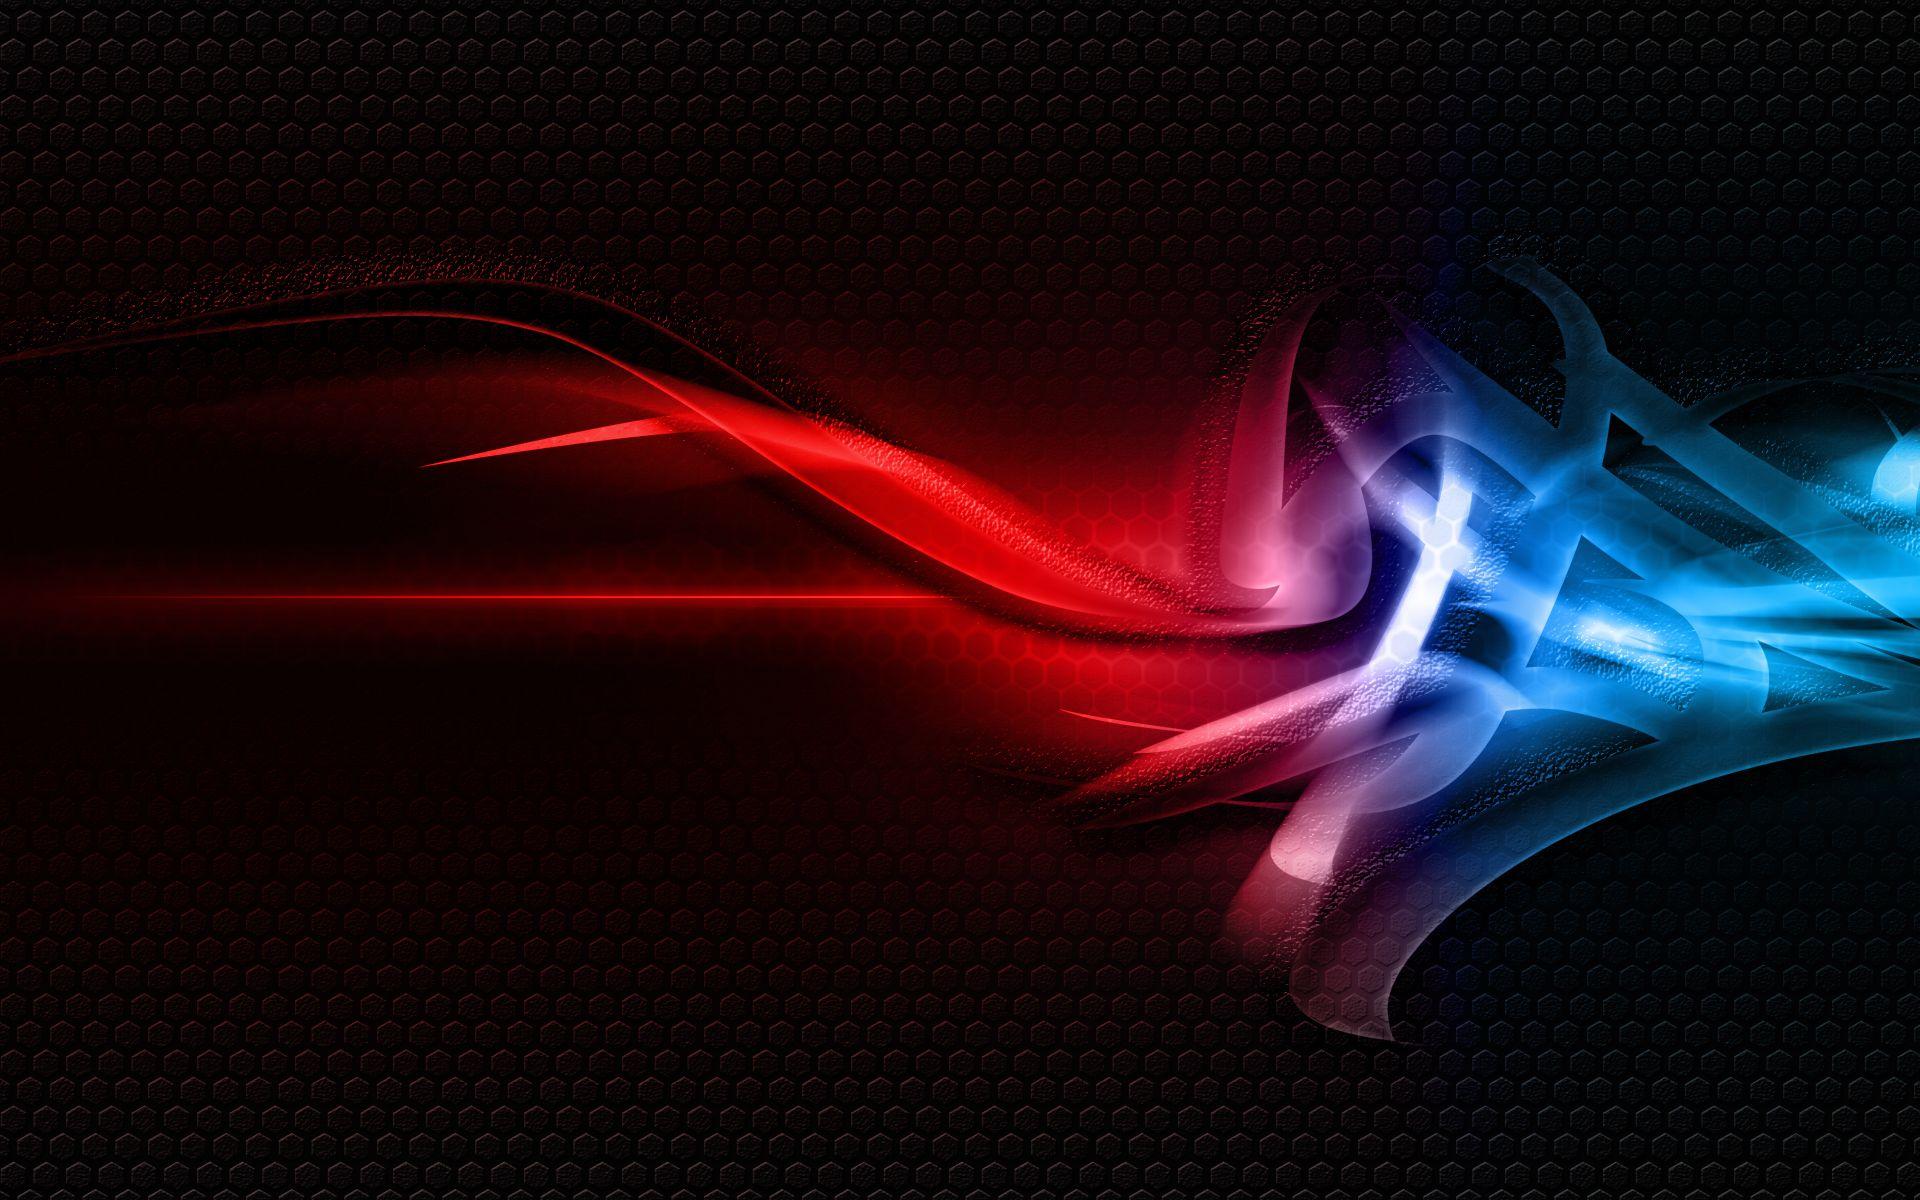 3D & abstract Wallpaper: Red White And Blue Wallpaper Background. Abstract art wallpaper, Abstract wallpaper, Red wallpaper